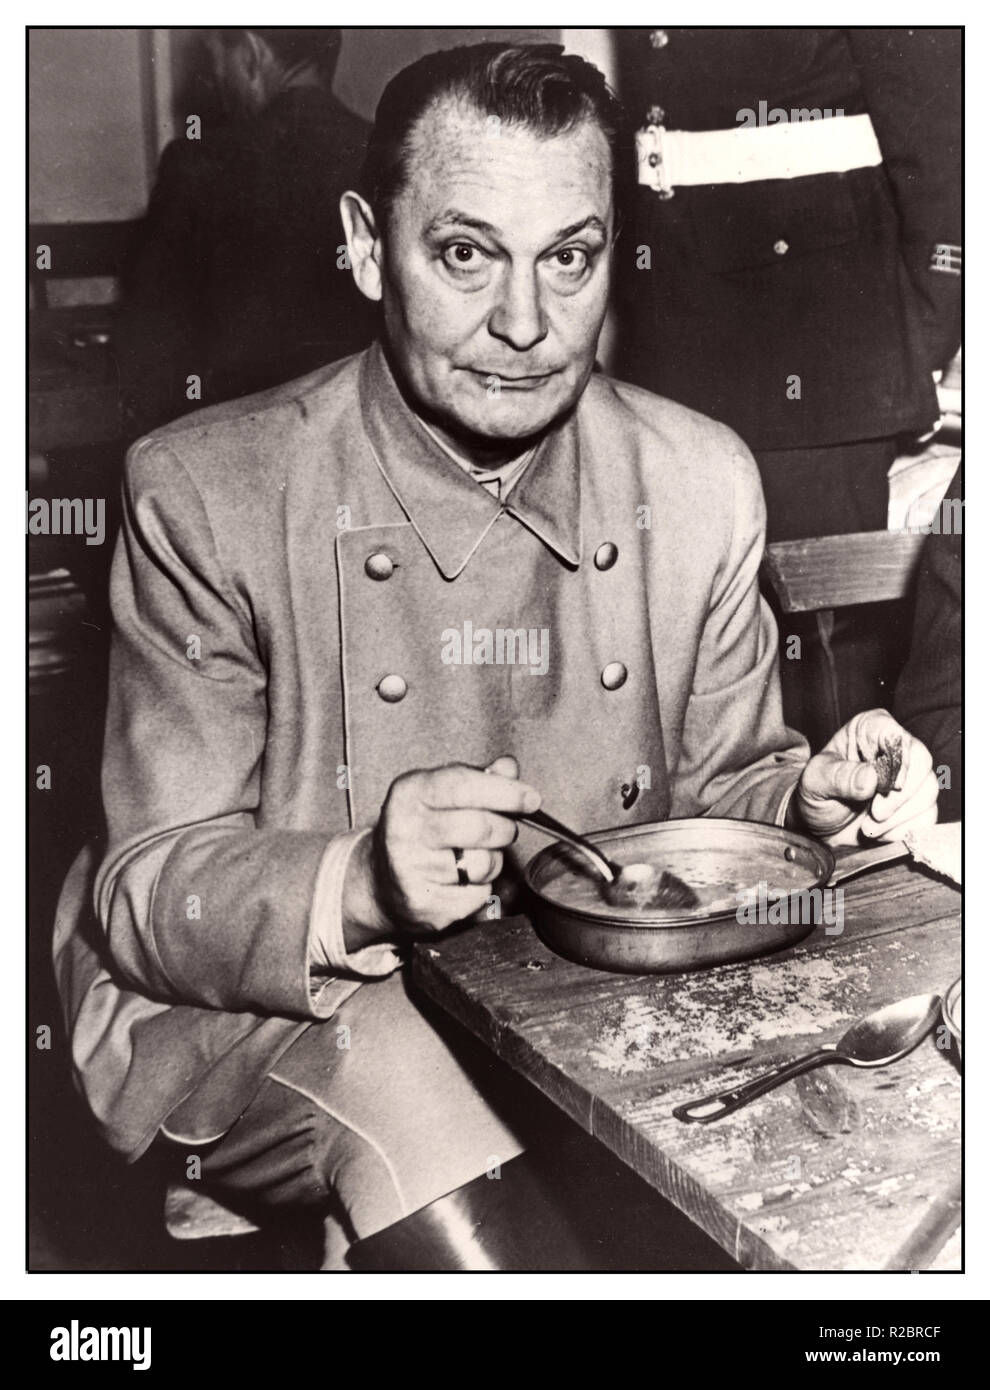 Hermann Goering Head of Nazi Luftwaffe Germany. The Third Reich's Field Marshal and commander of all German air forces during a meal break at The Nuremberg trials in October/November 1945. He committed suicide in his cell after his conviction and death sentence by International Military Tribunal at the Nuremberg war crimes trials for crimes against humanity November 1946. Stock Photo